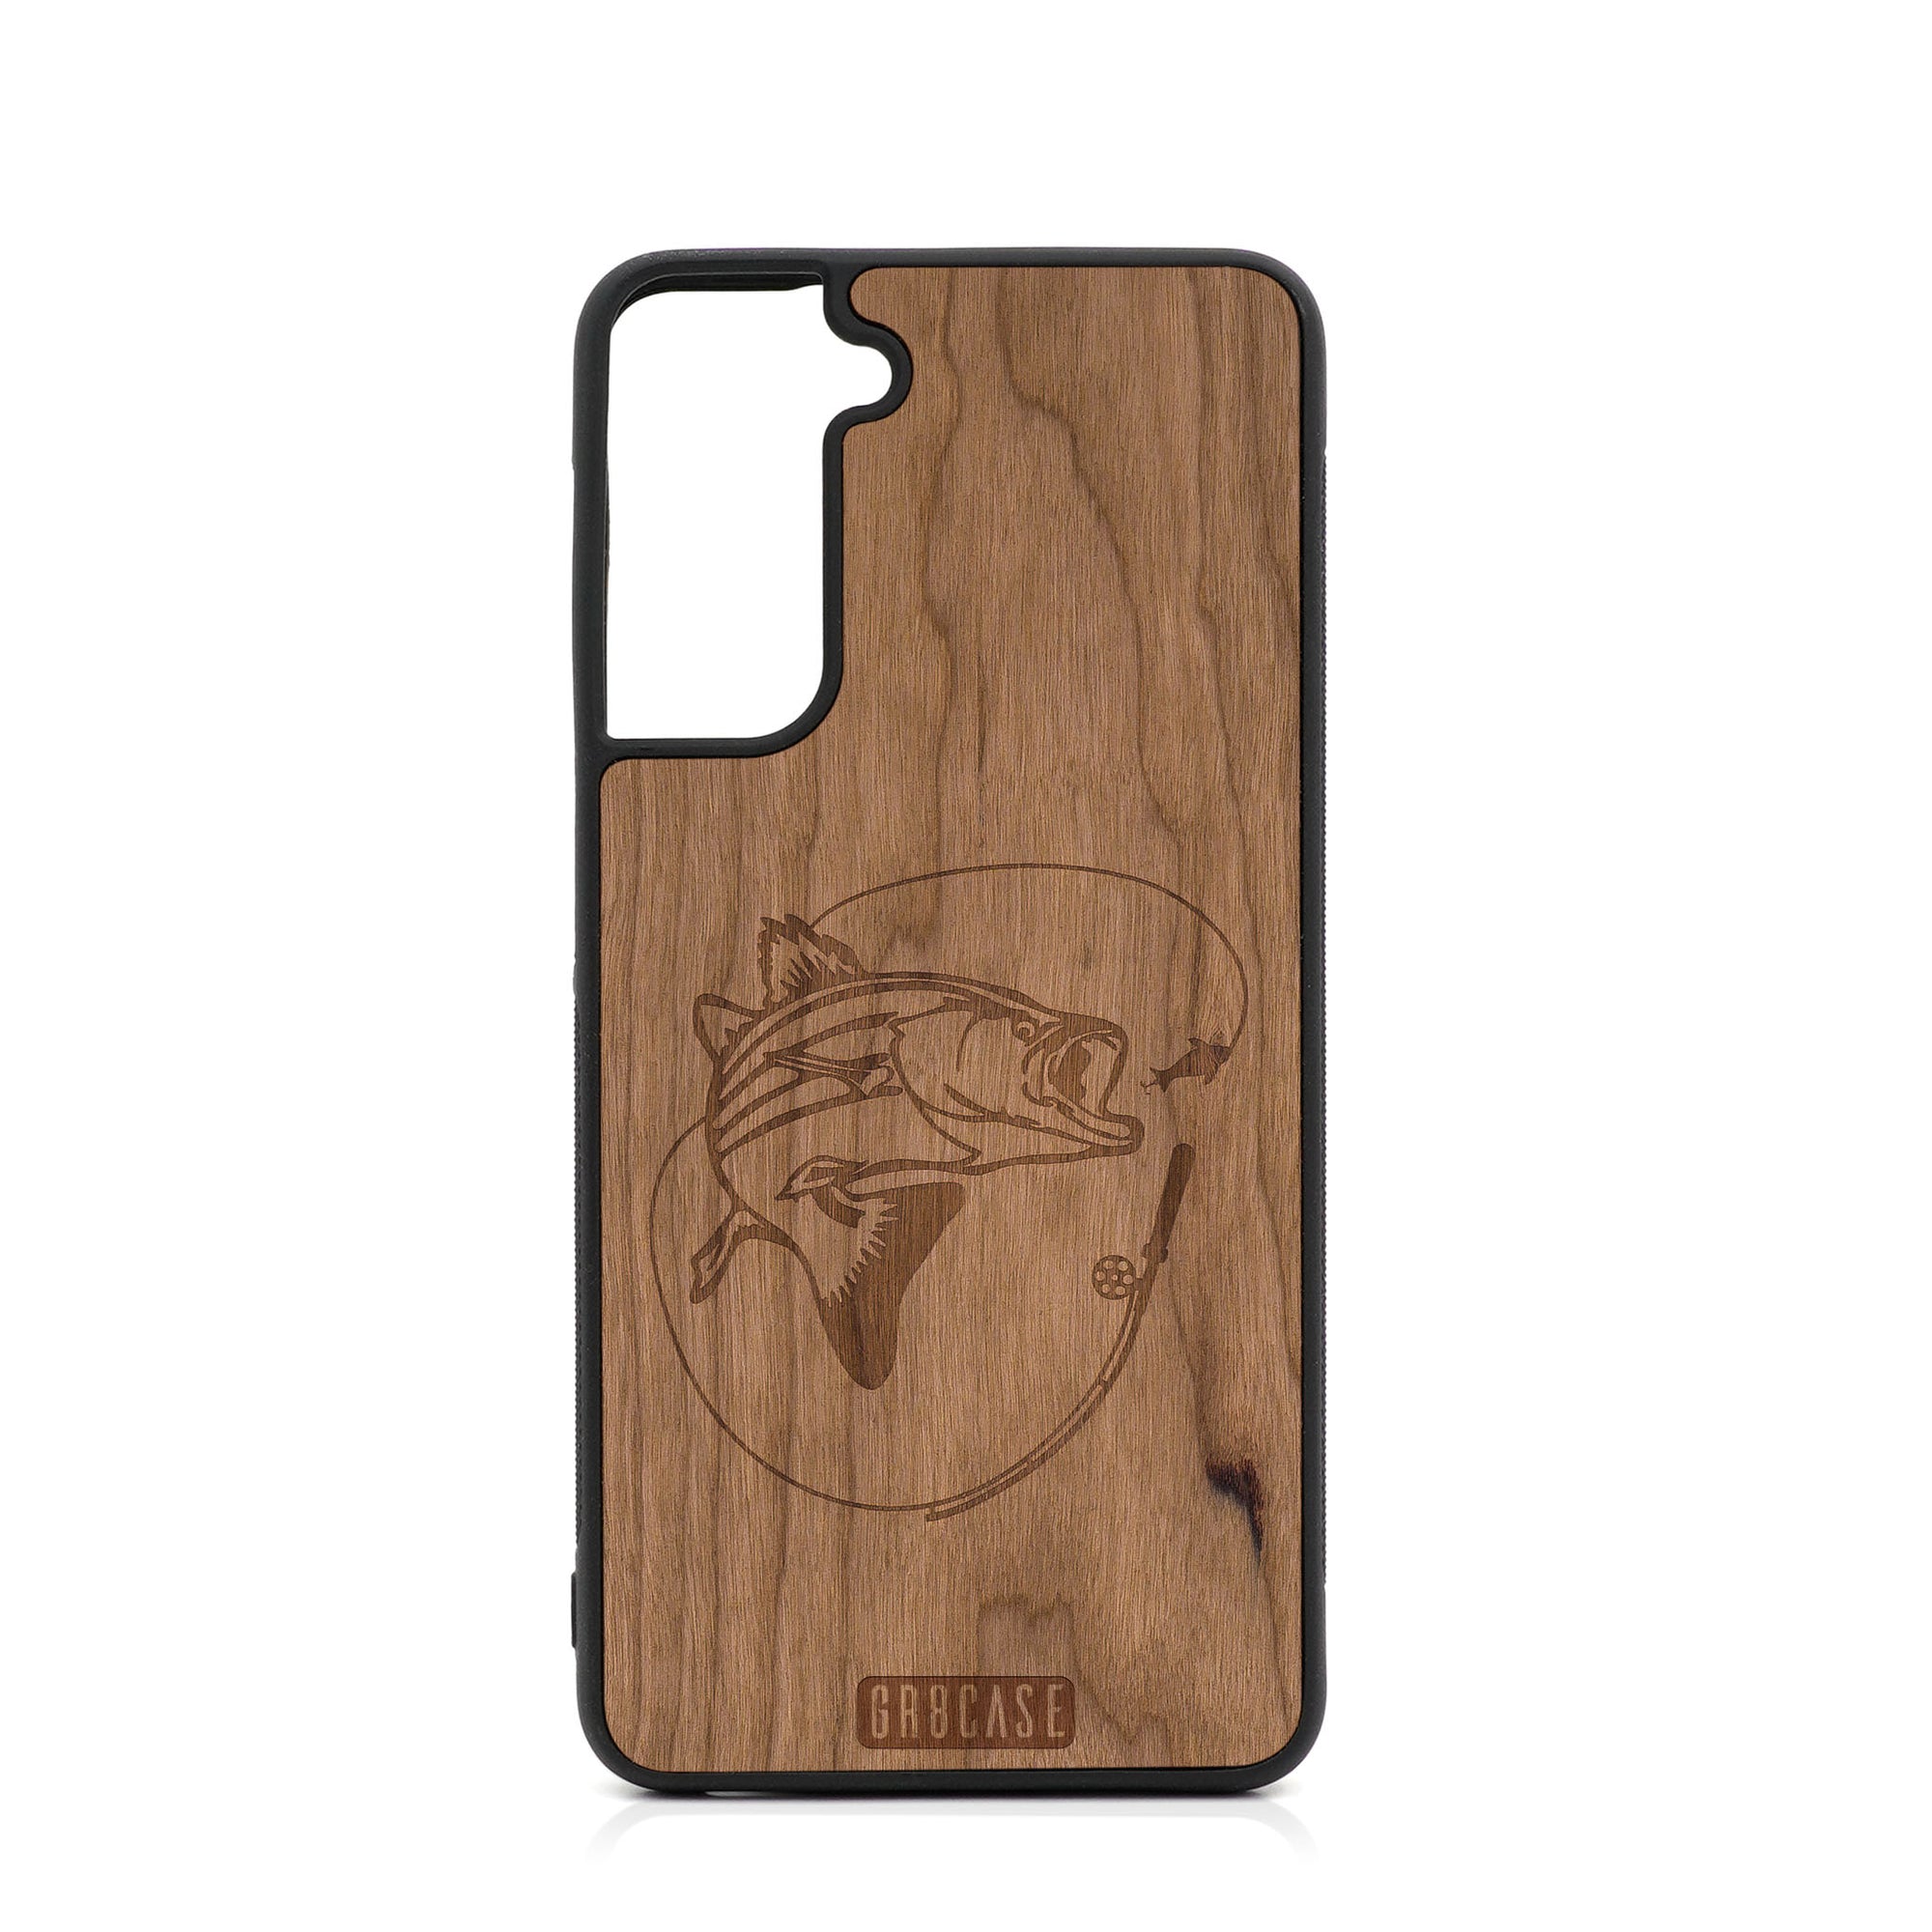 Fish and Reel Design Wood Case For Samsung Galaxy S21 Plus 5G